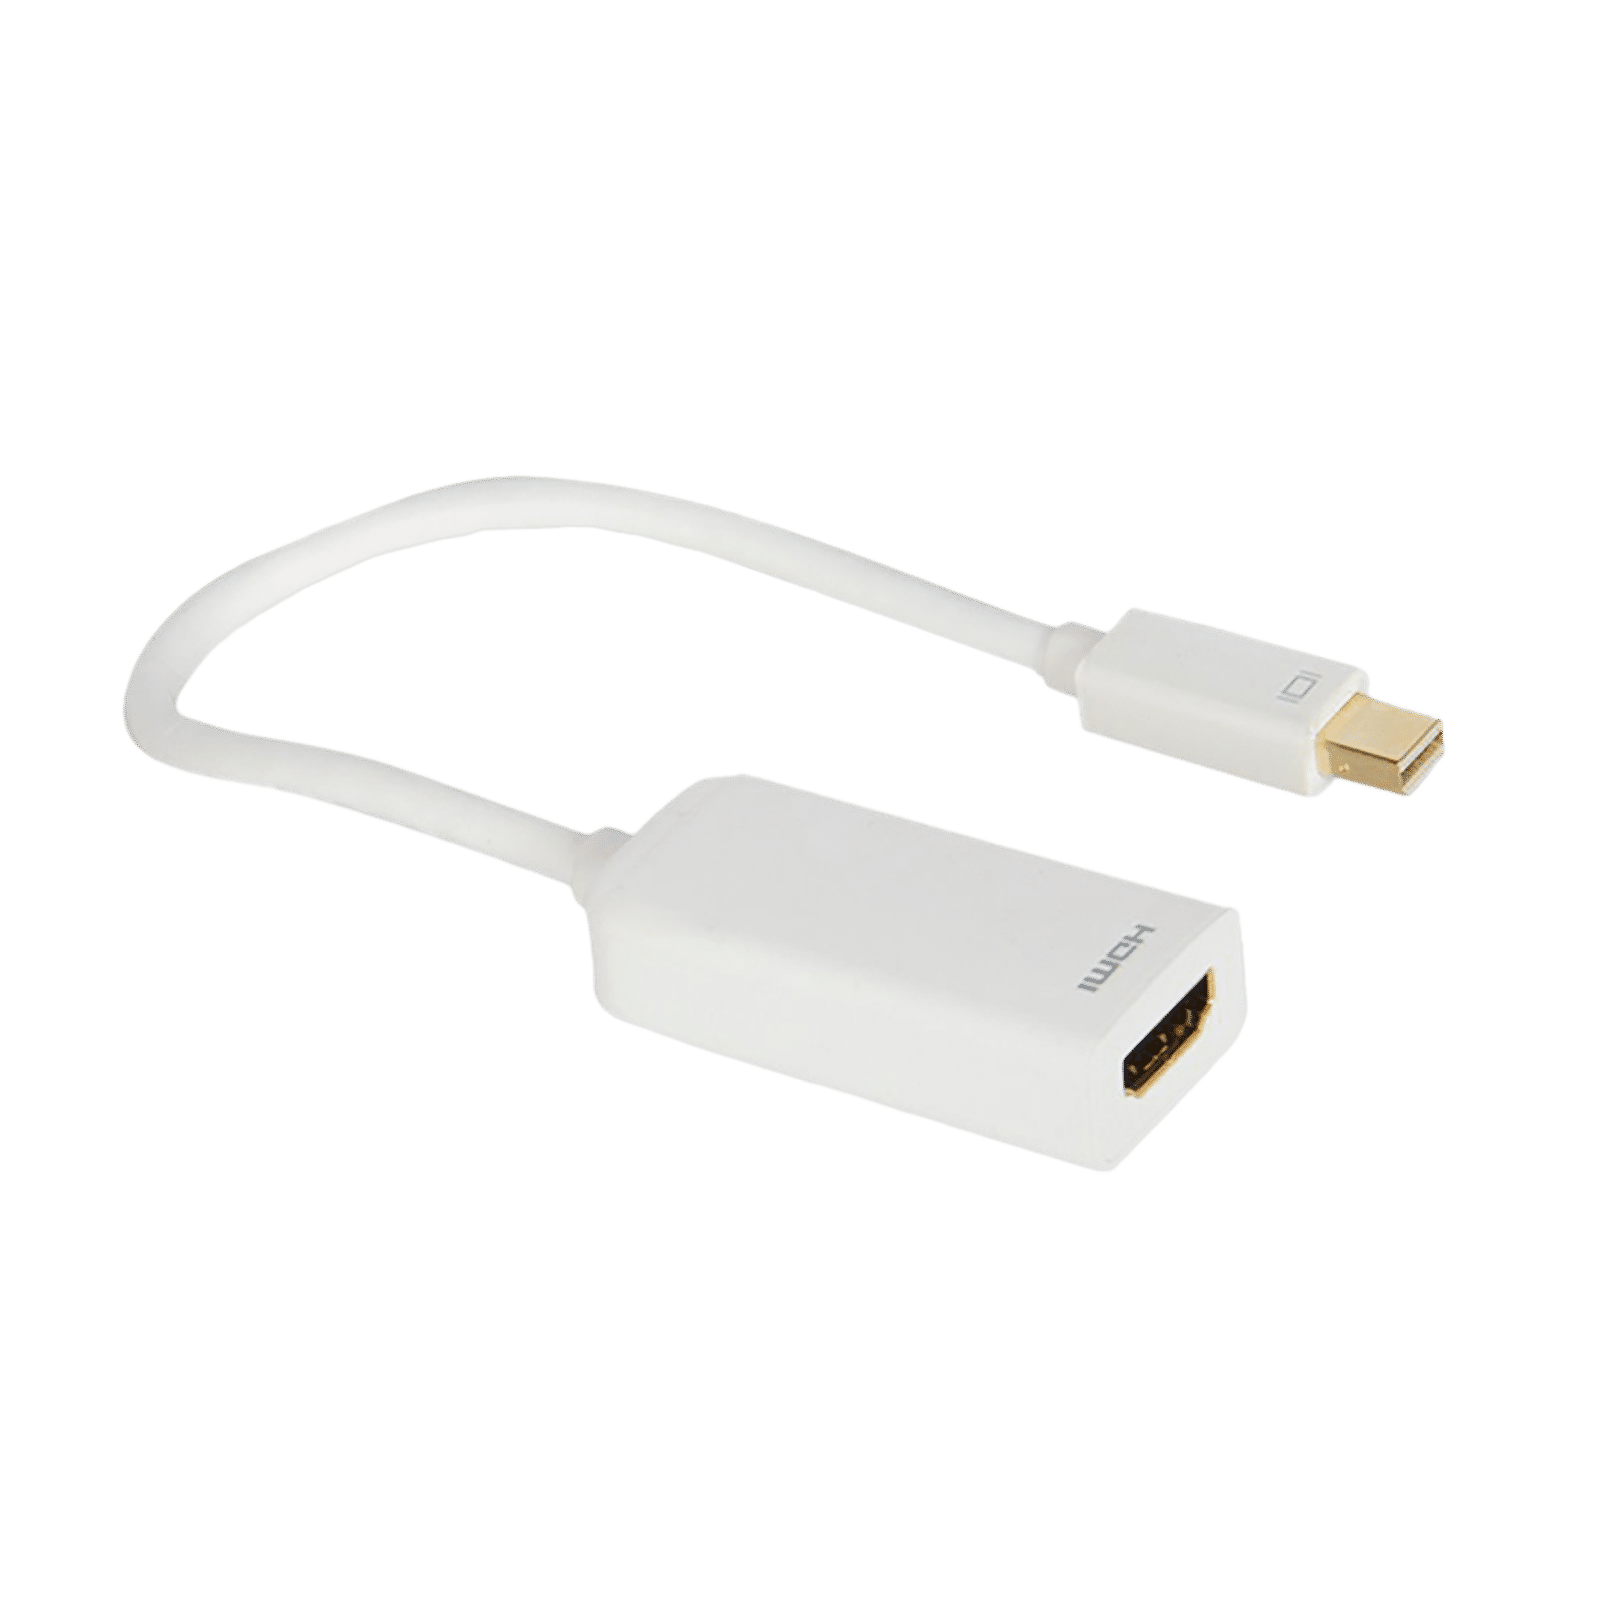 Cable Matters Mini DisplayPort to DisplayPort Cable (Mini DP to DP) in  Black 6 Feet, Thunderbolt 2 Port Compatible 